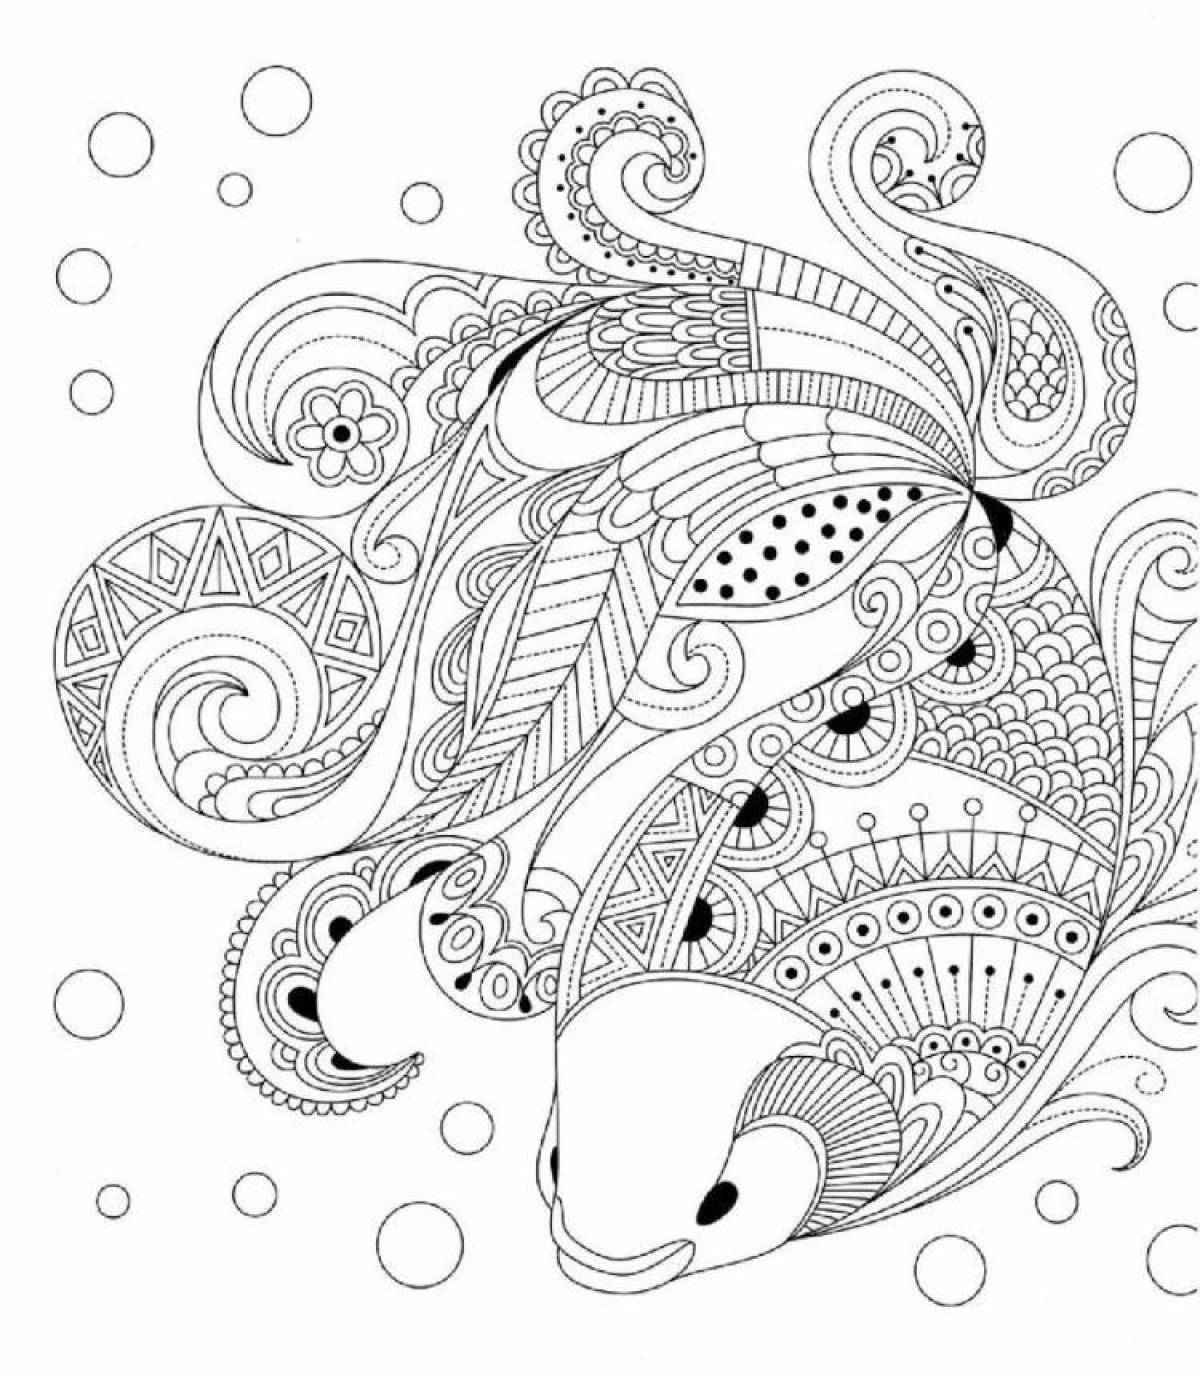 Content coloring page